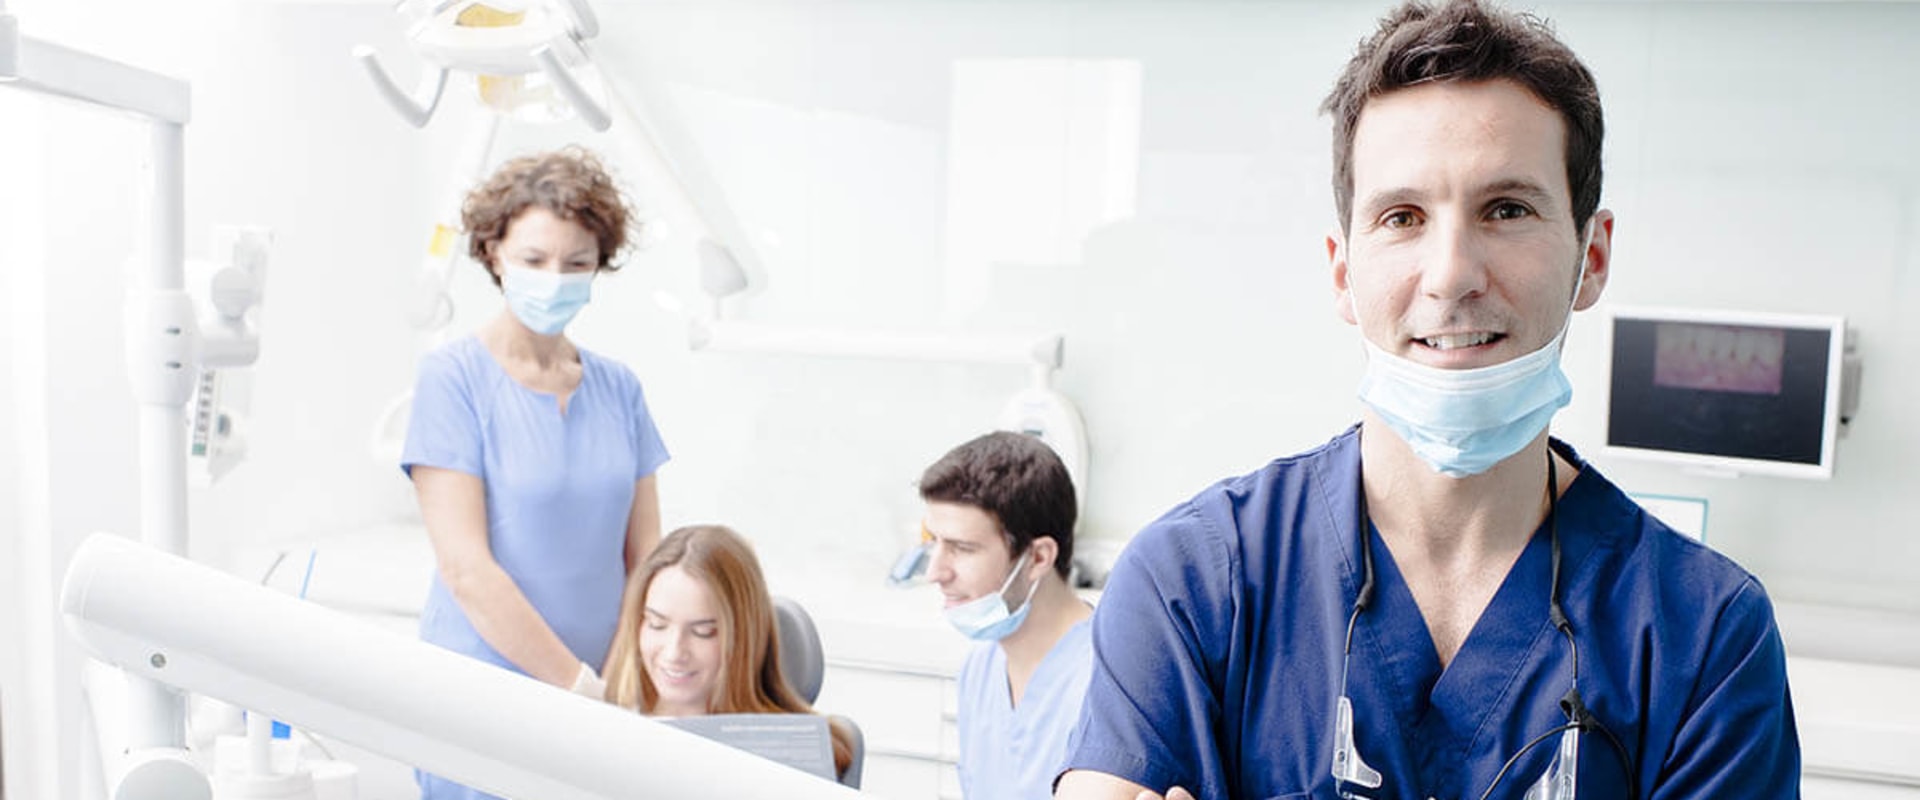 Becoming an Endodontist: How Many Years Does It Take?